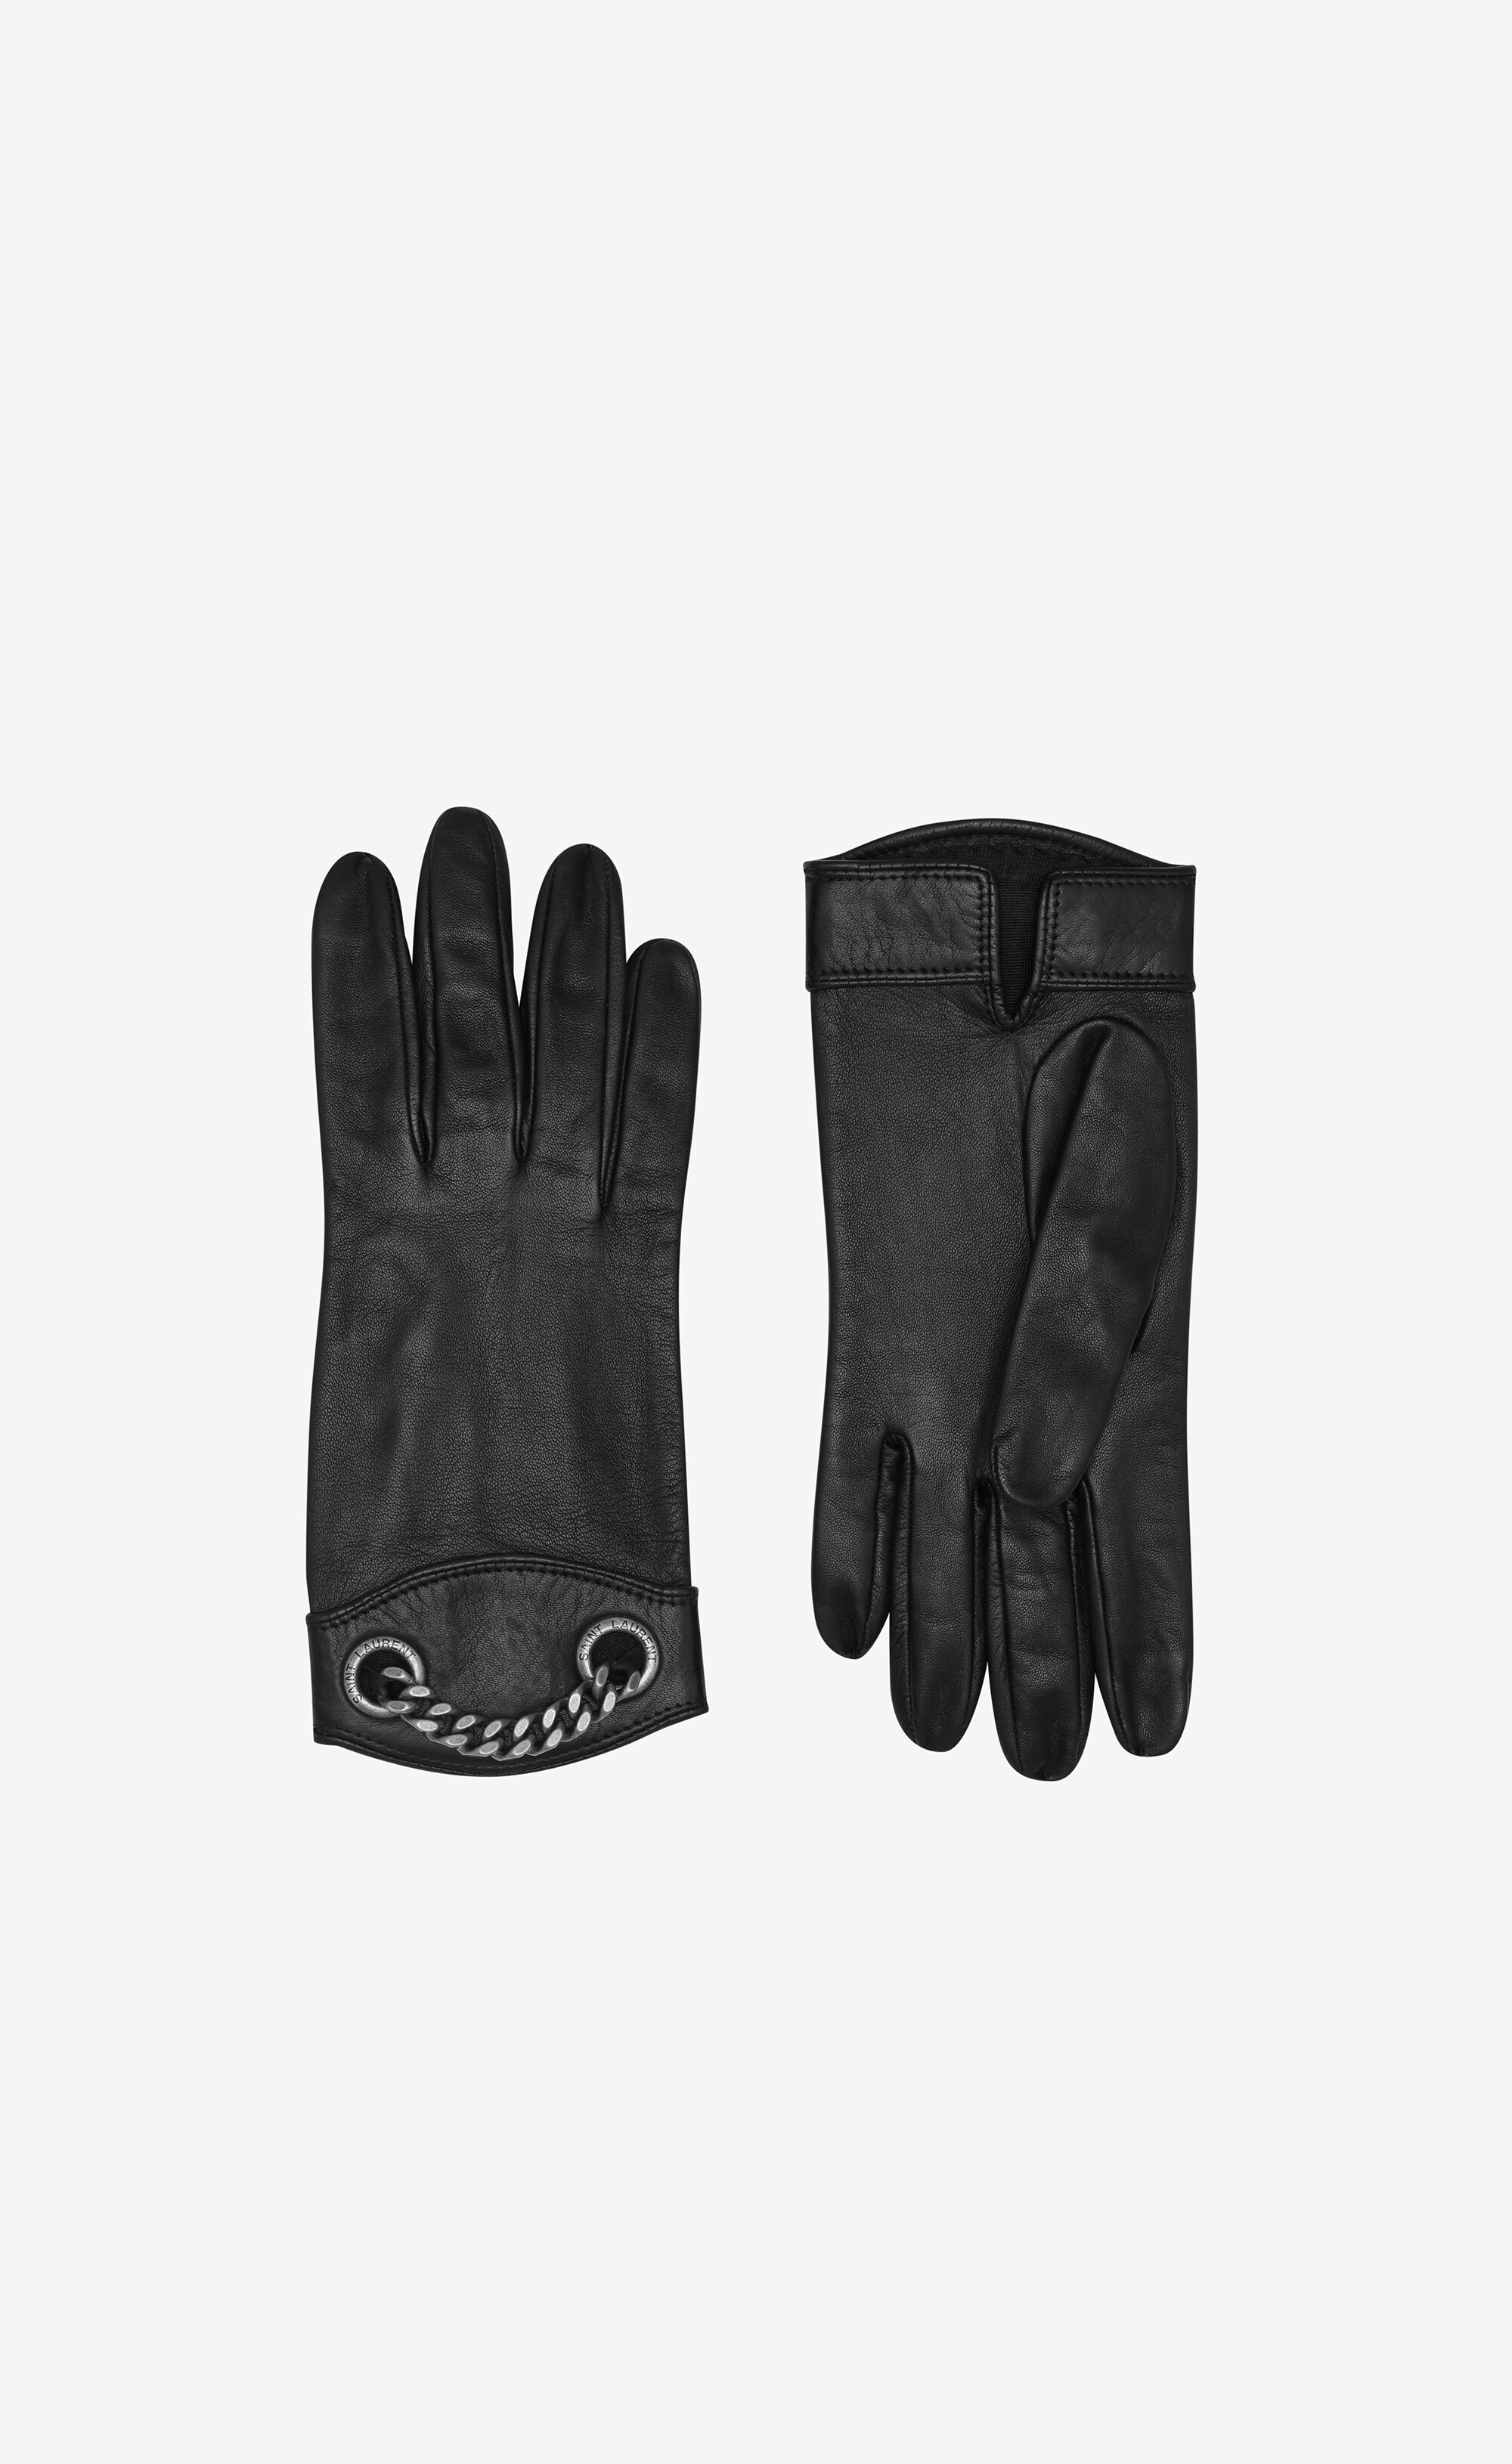 gloves in leather and metal - 1